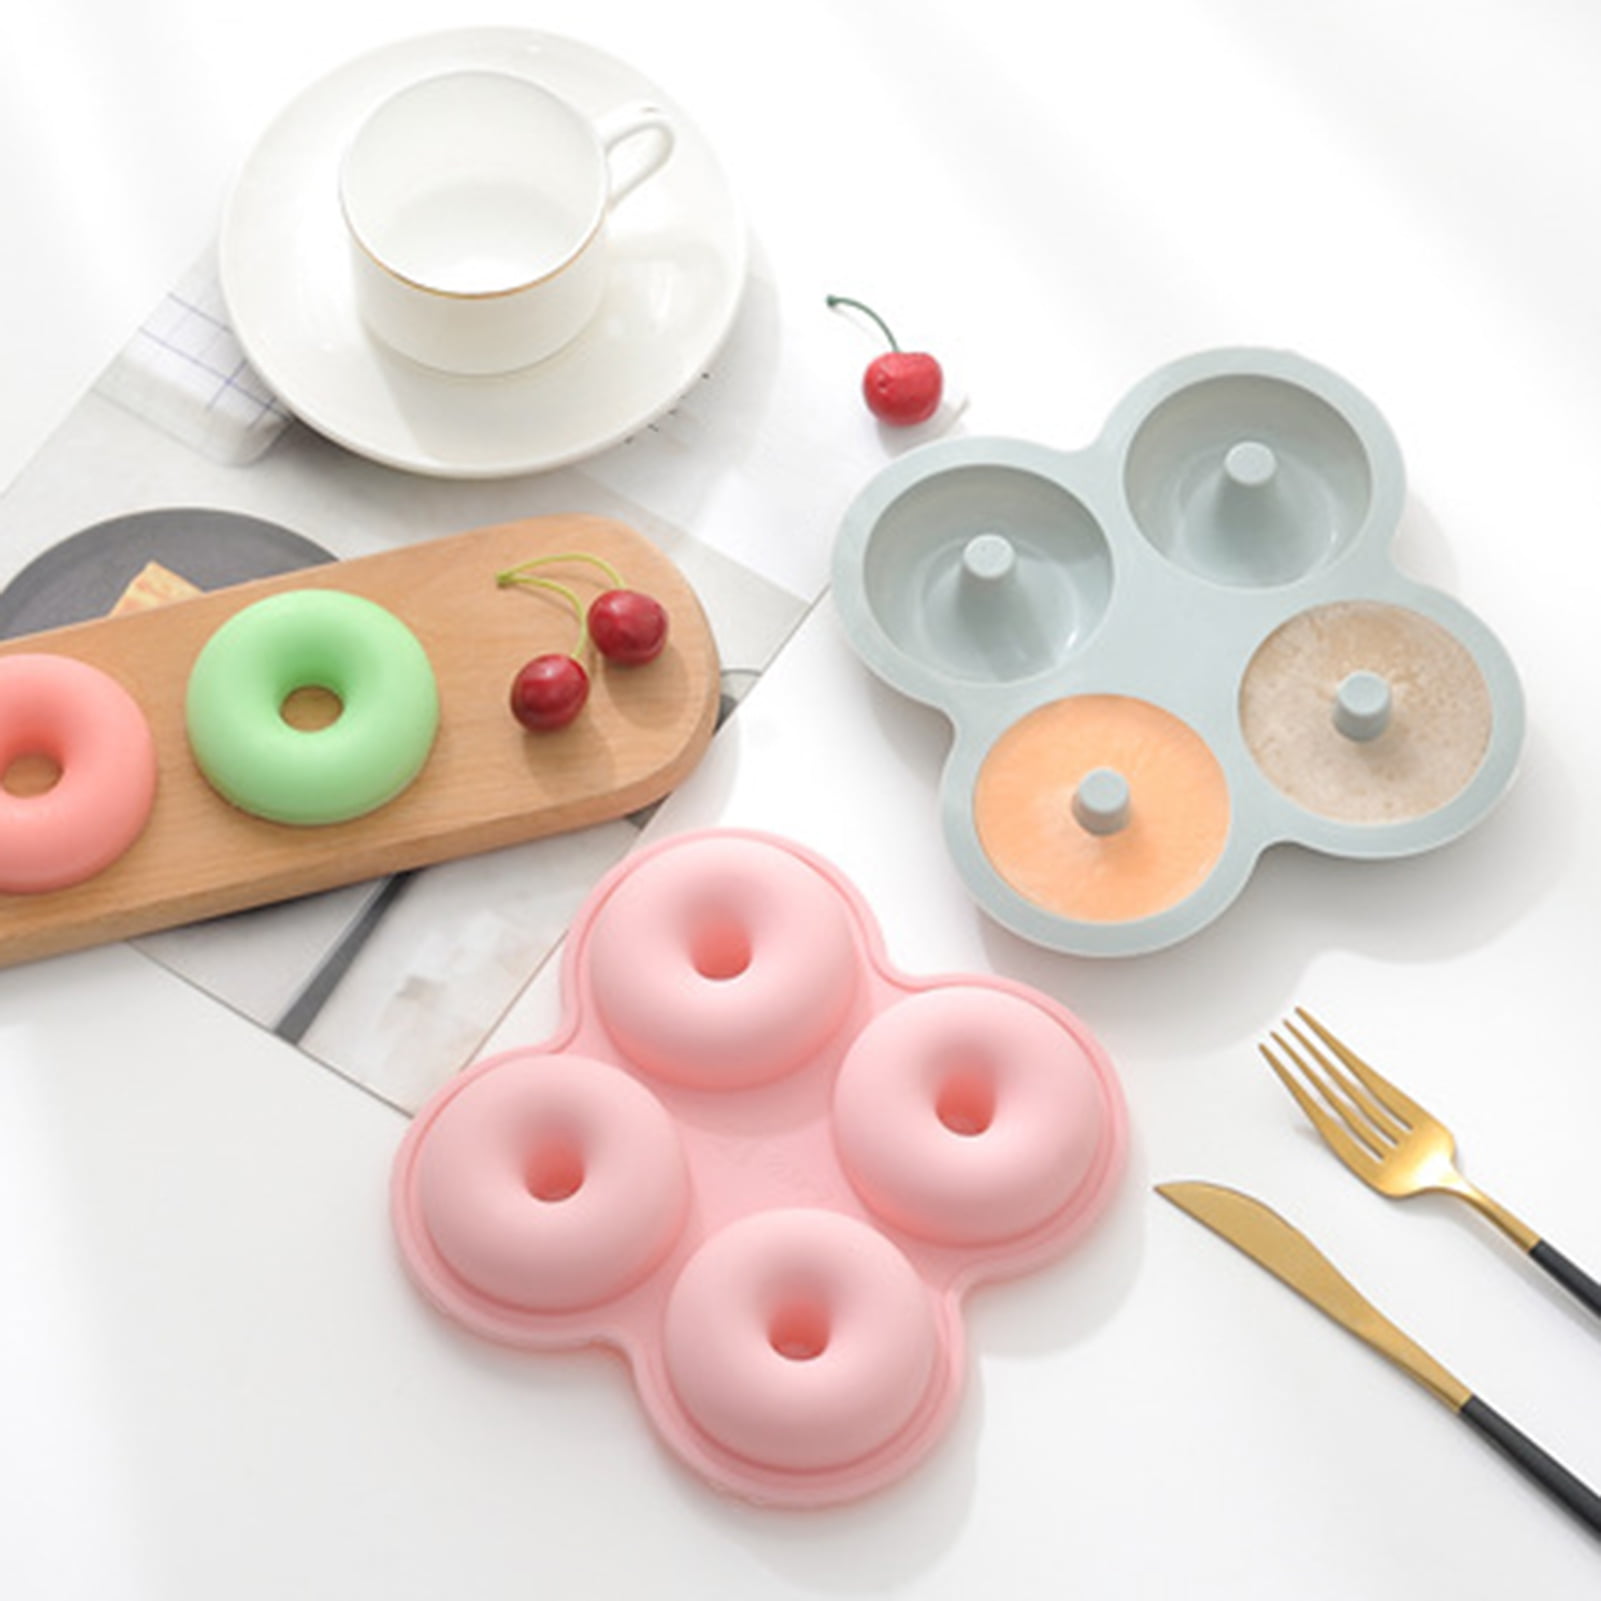 NOGIS Full Size Silicone Donut Mold - 4 inch Big Size Silicone Doughnut Pan  Set, Non-Stick, Justout! Heat Resistant, BPA Free and Dishwasher Safe, for  Donut Cake Biscuit Bagels (3 Pcs) 